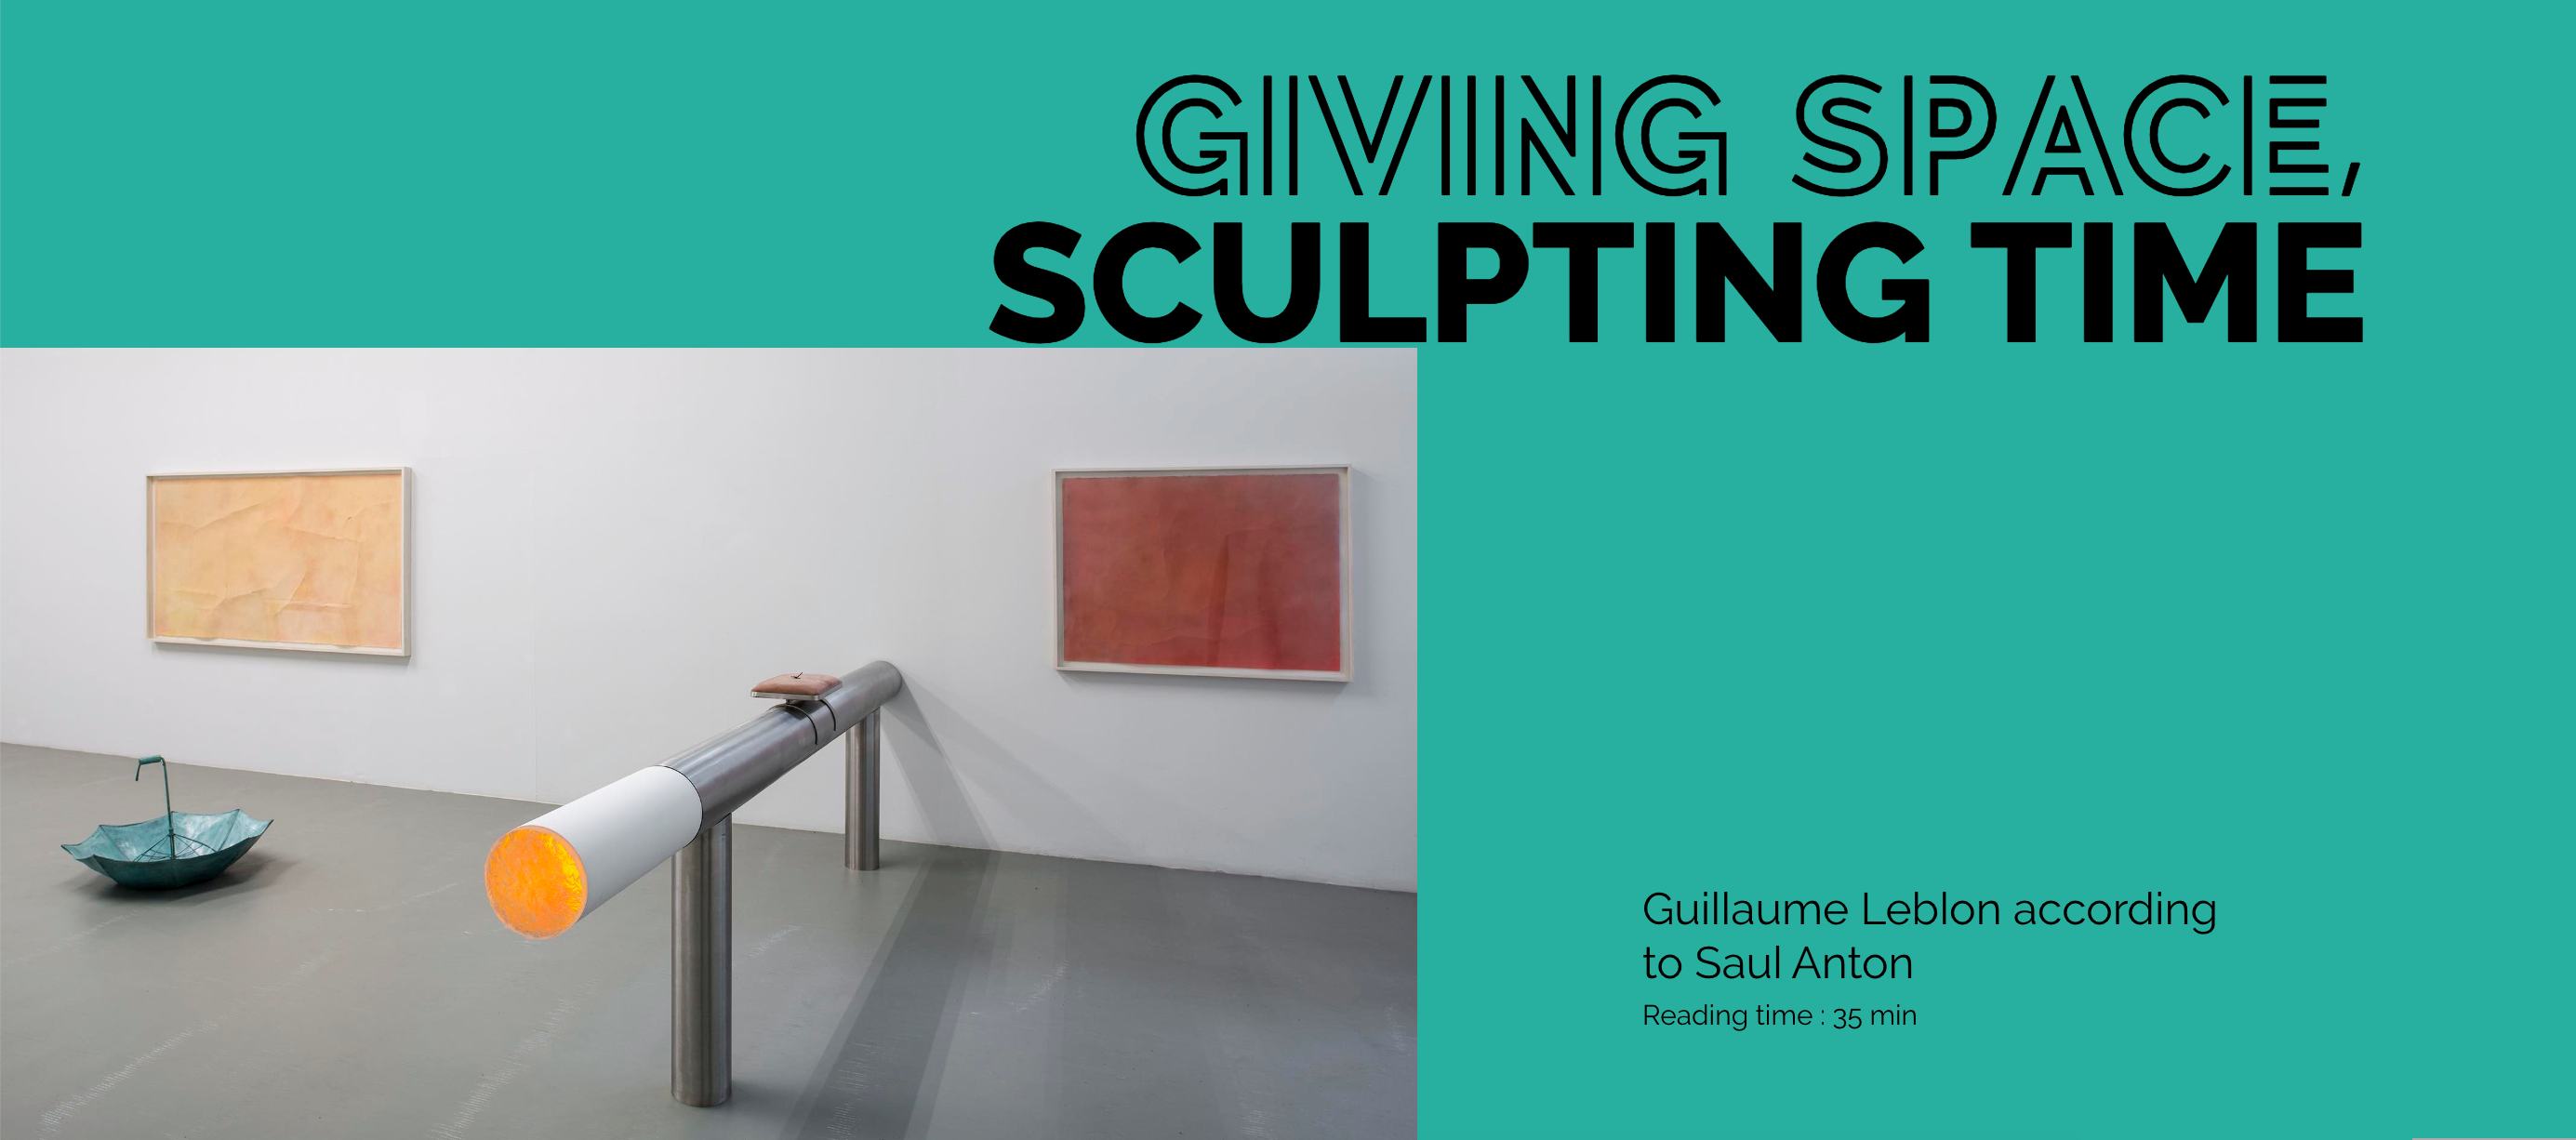 Guillaume Leblon according to Saul Anton | Giving Space, Sculpting Time – TextWork